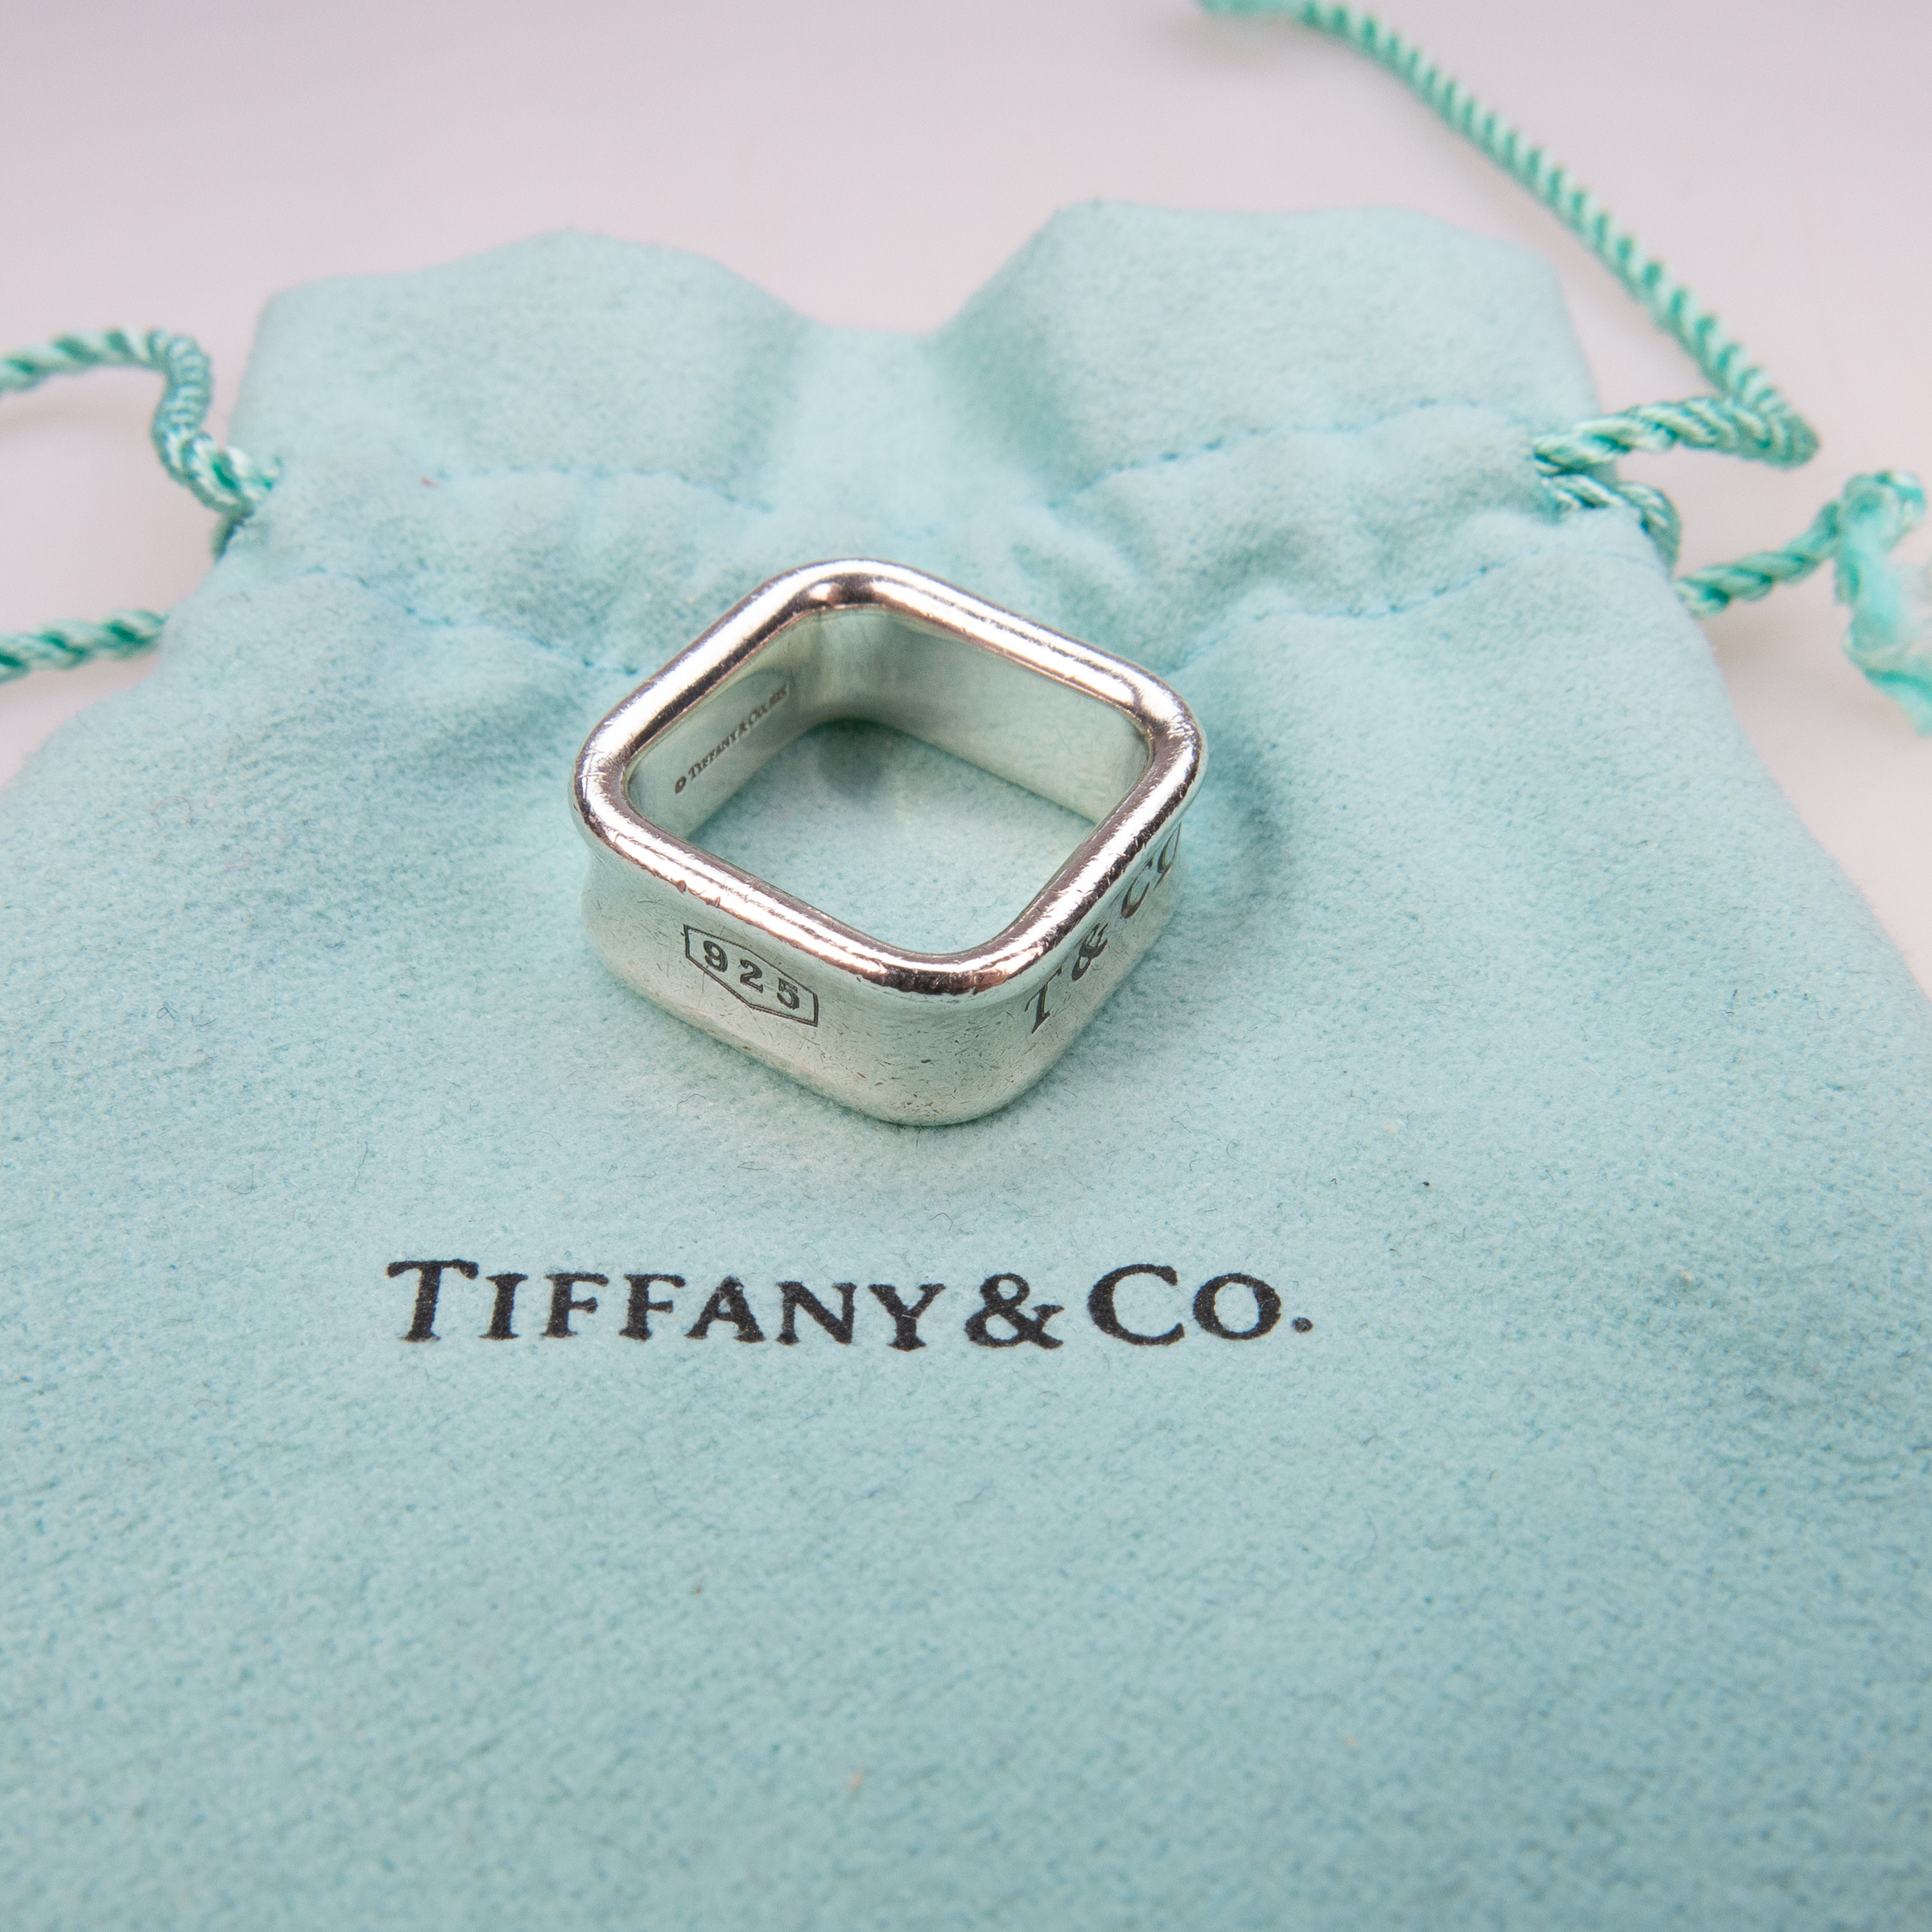 Tiffany & Co. Sterling Silver 1837 Square Ring